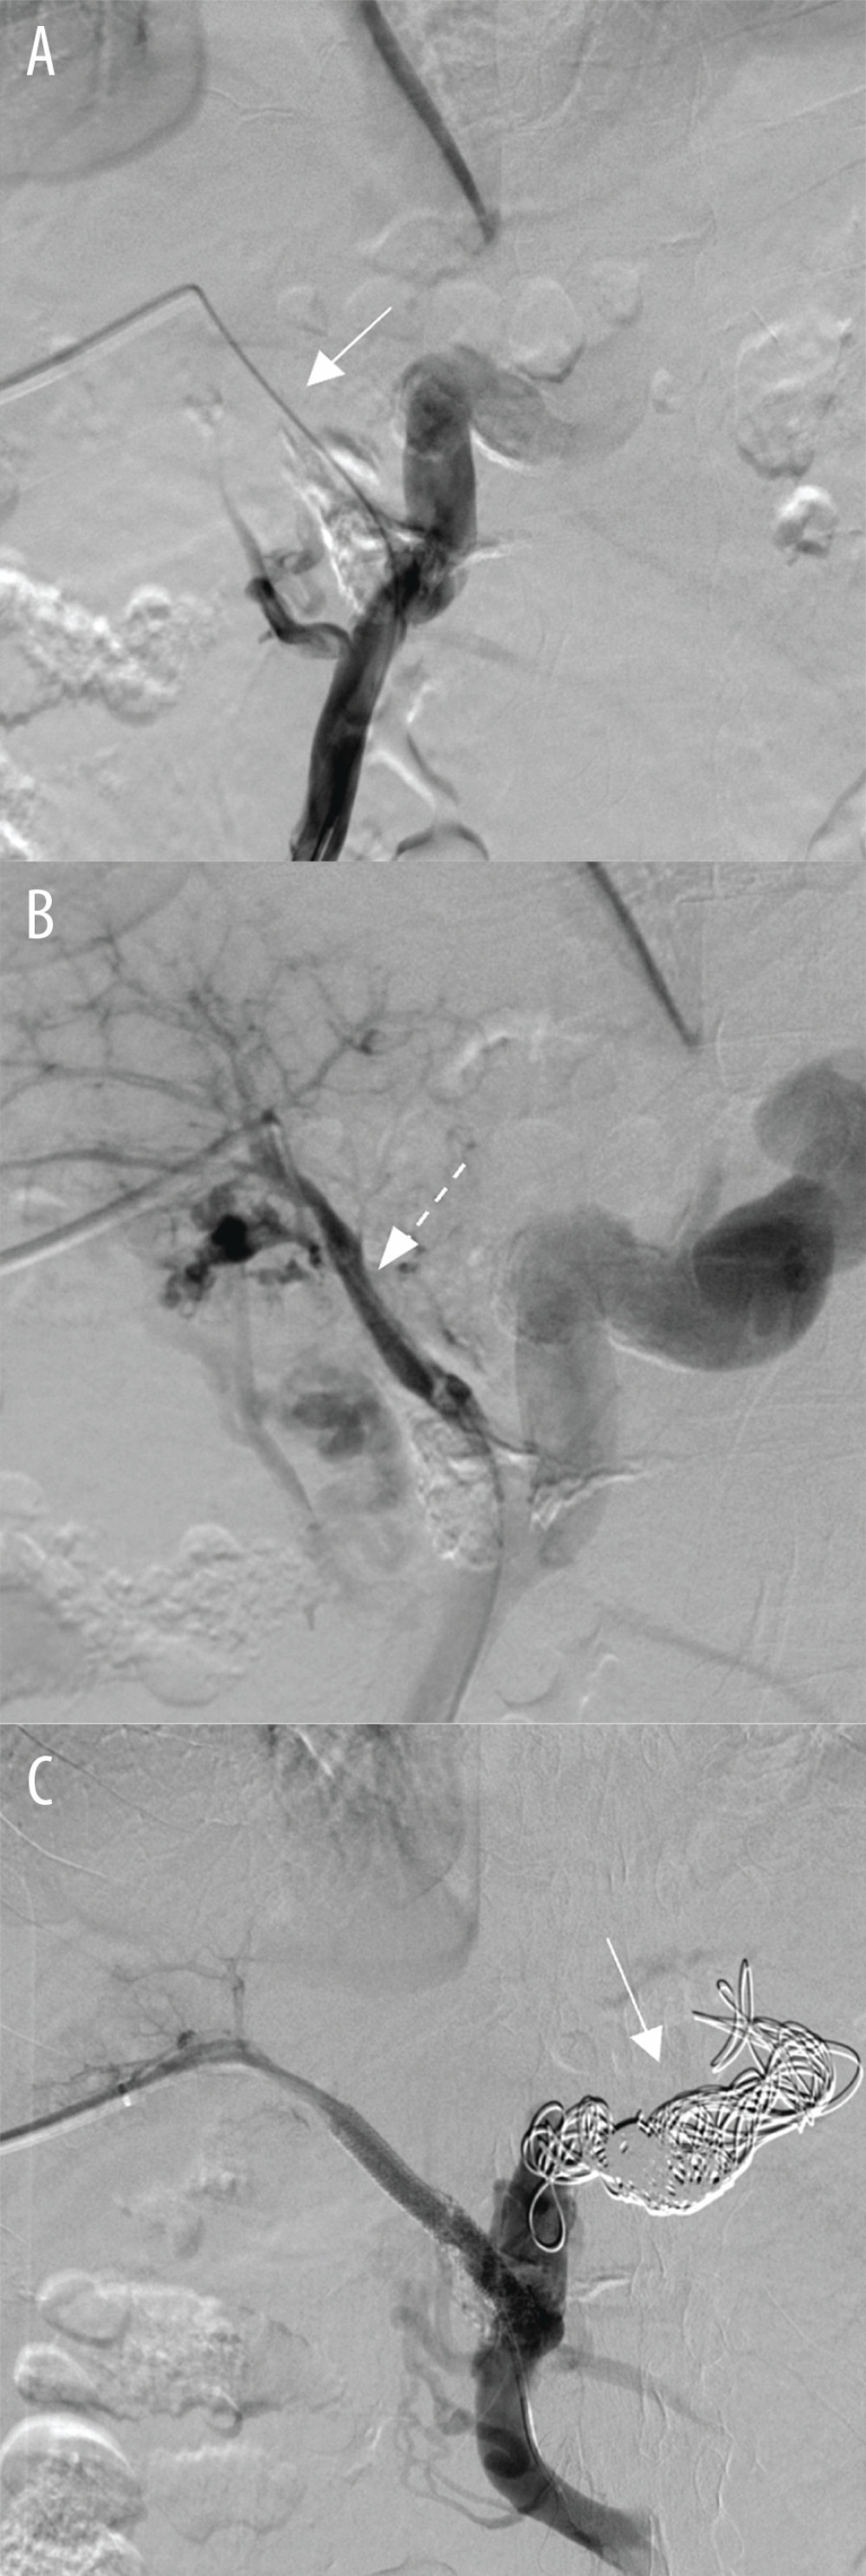 (A) After balloon dilation and stenting of the main portal vein (solid arrow), blood flow was restored (dotted arrow) and (B) flow through the tortuous venous channels were diminished. (C) Main portal vein stent and coil embolization of the coronary vein resulted in restored flow through main portal vein and cessation of flow through massive coronary vein (solid arrow).